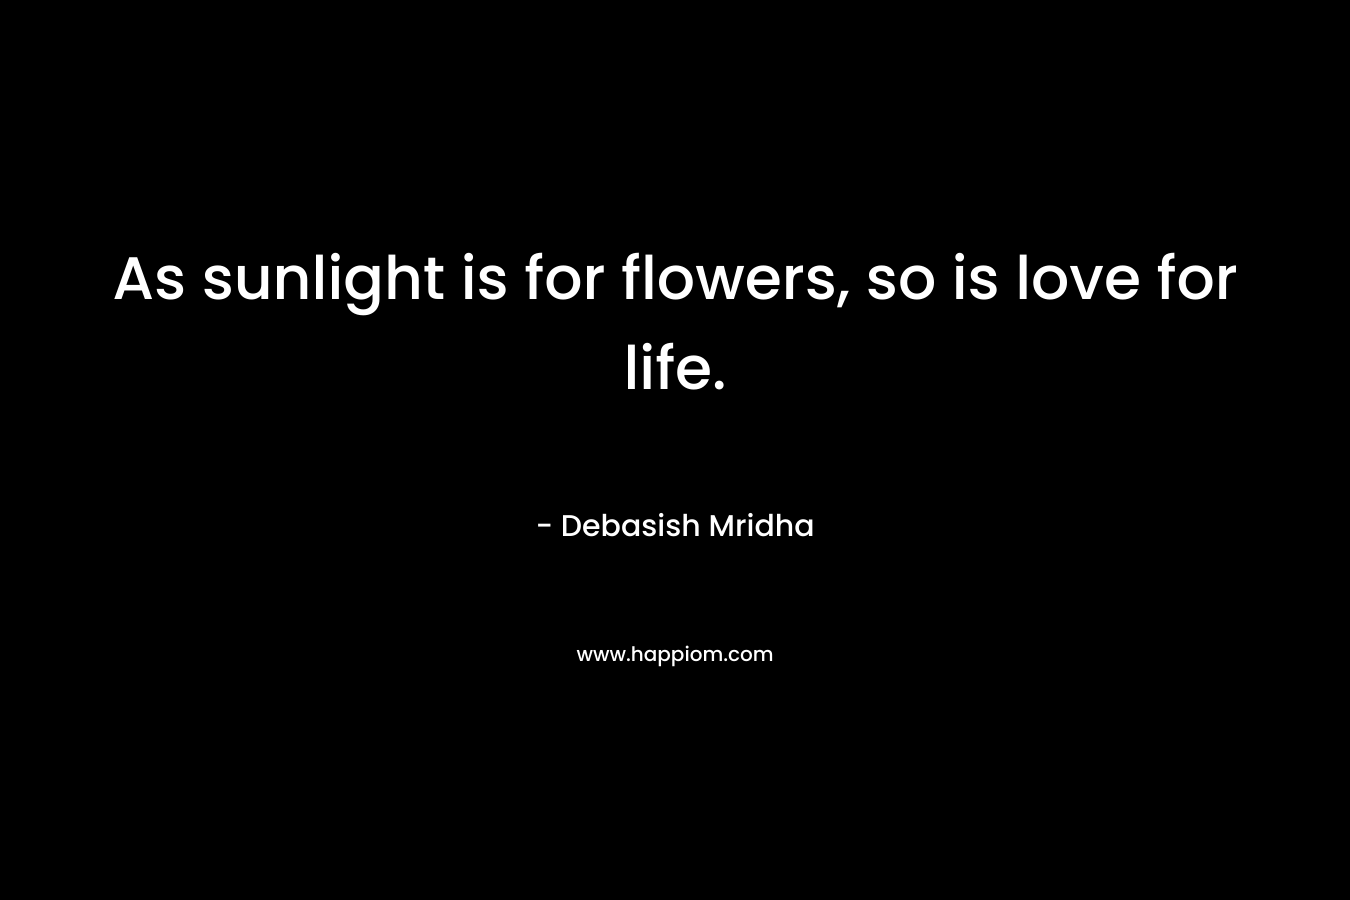 As sunlight is for flowers, so is love for life.